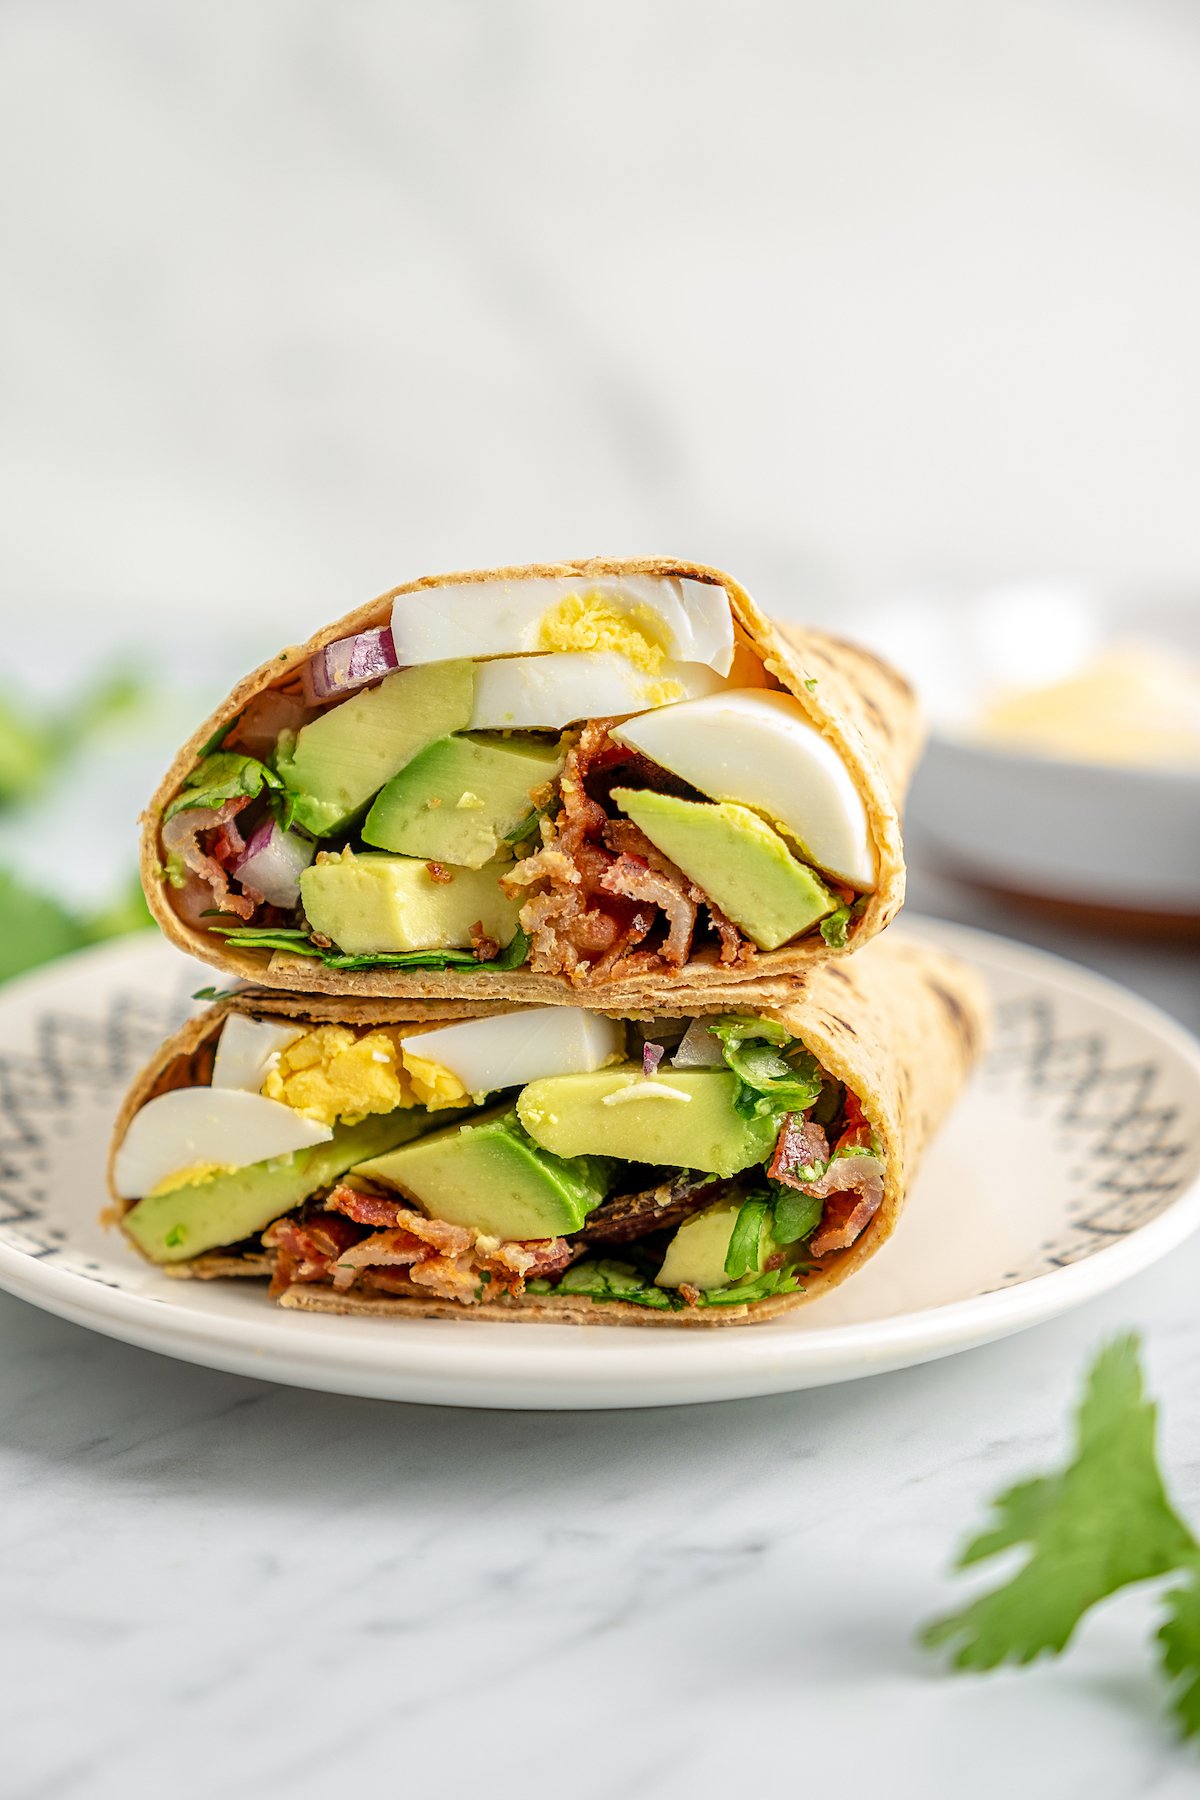 A homemade breakfast wrap with hard boiled eggs and avocado.